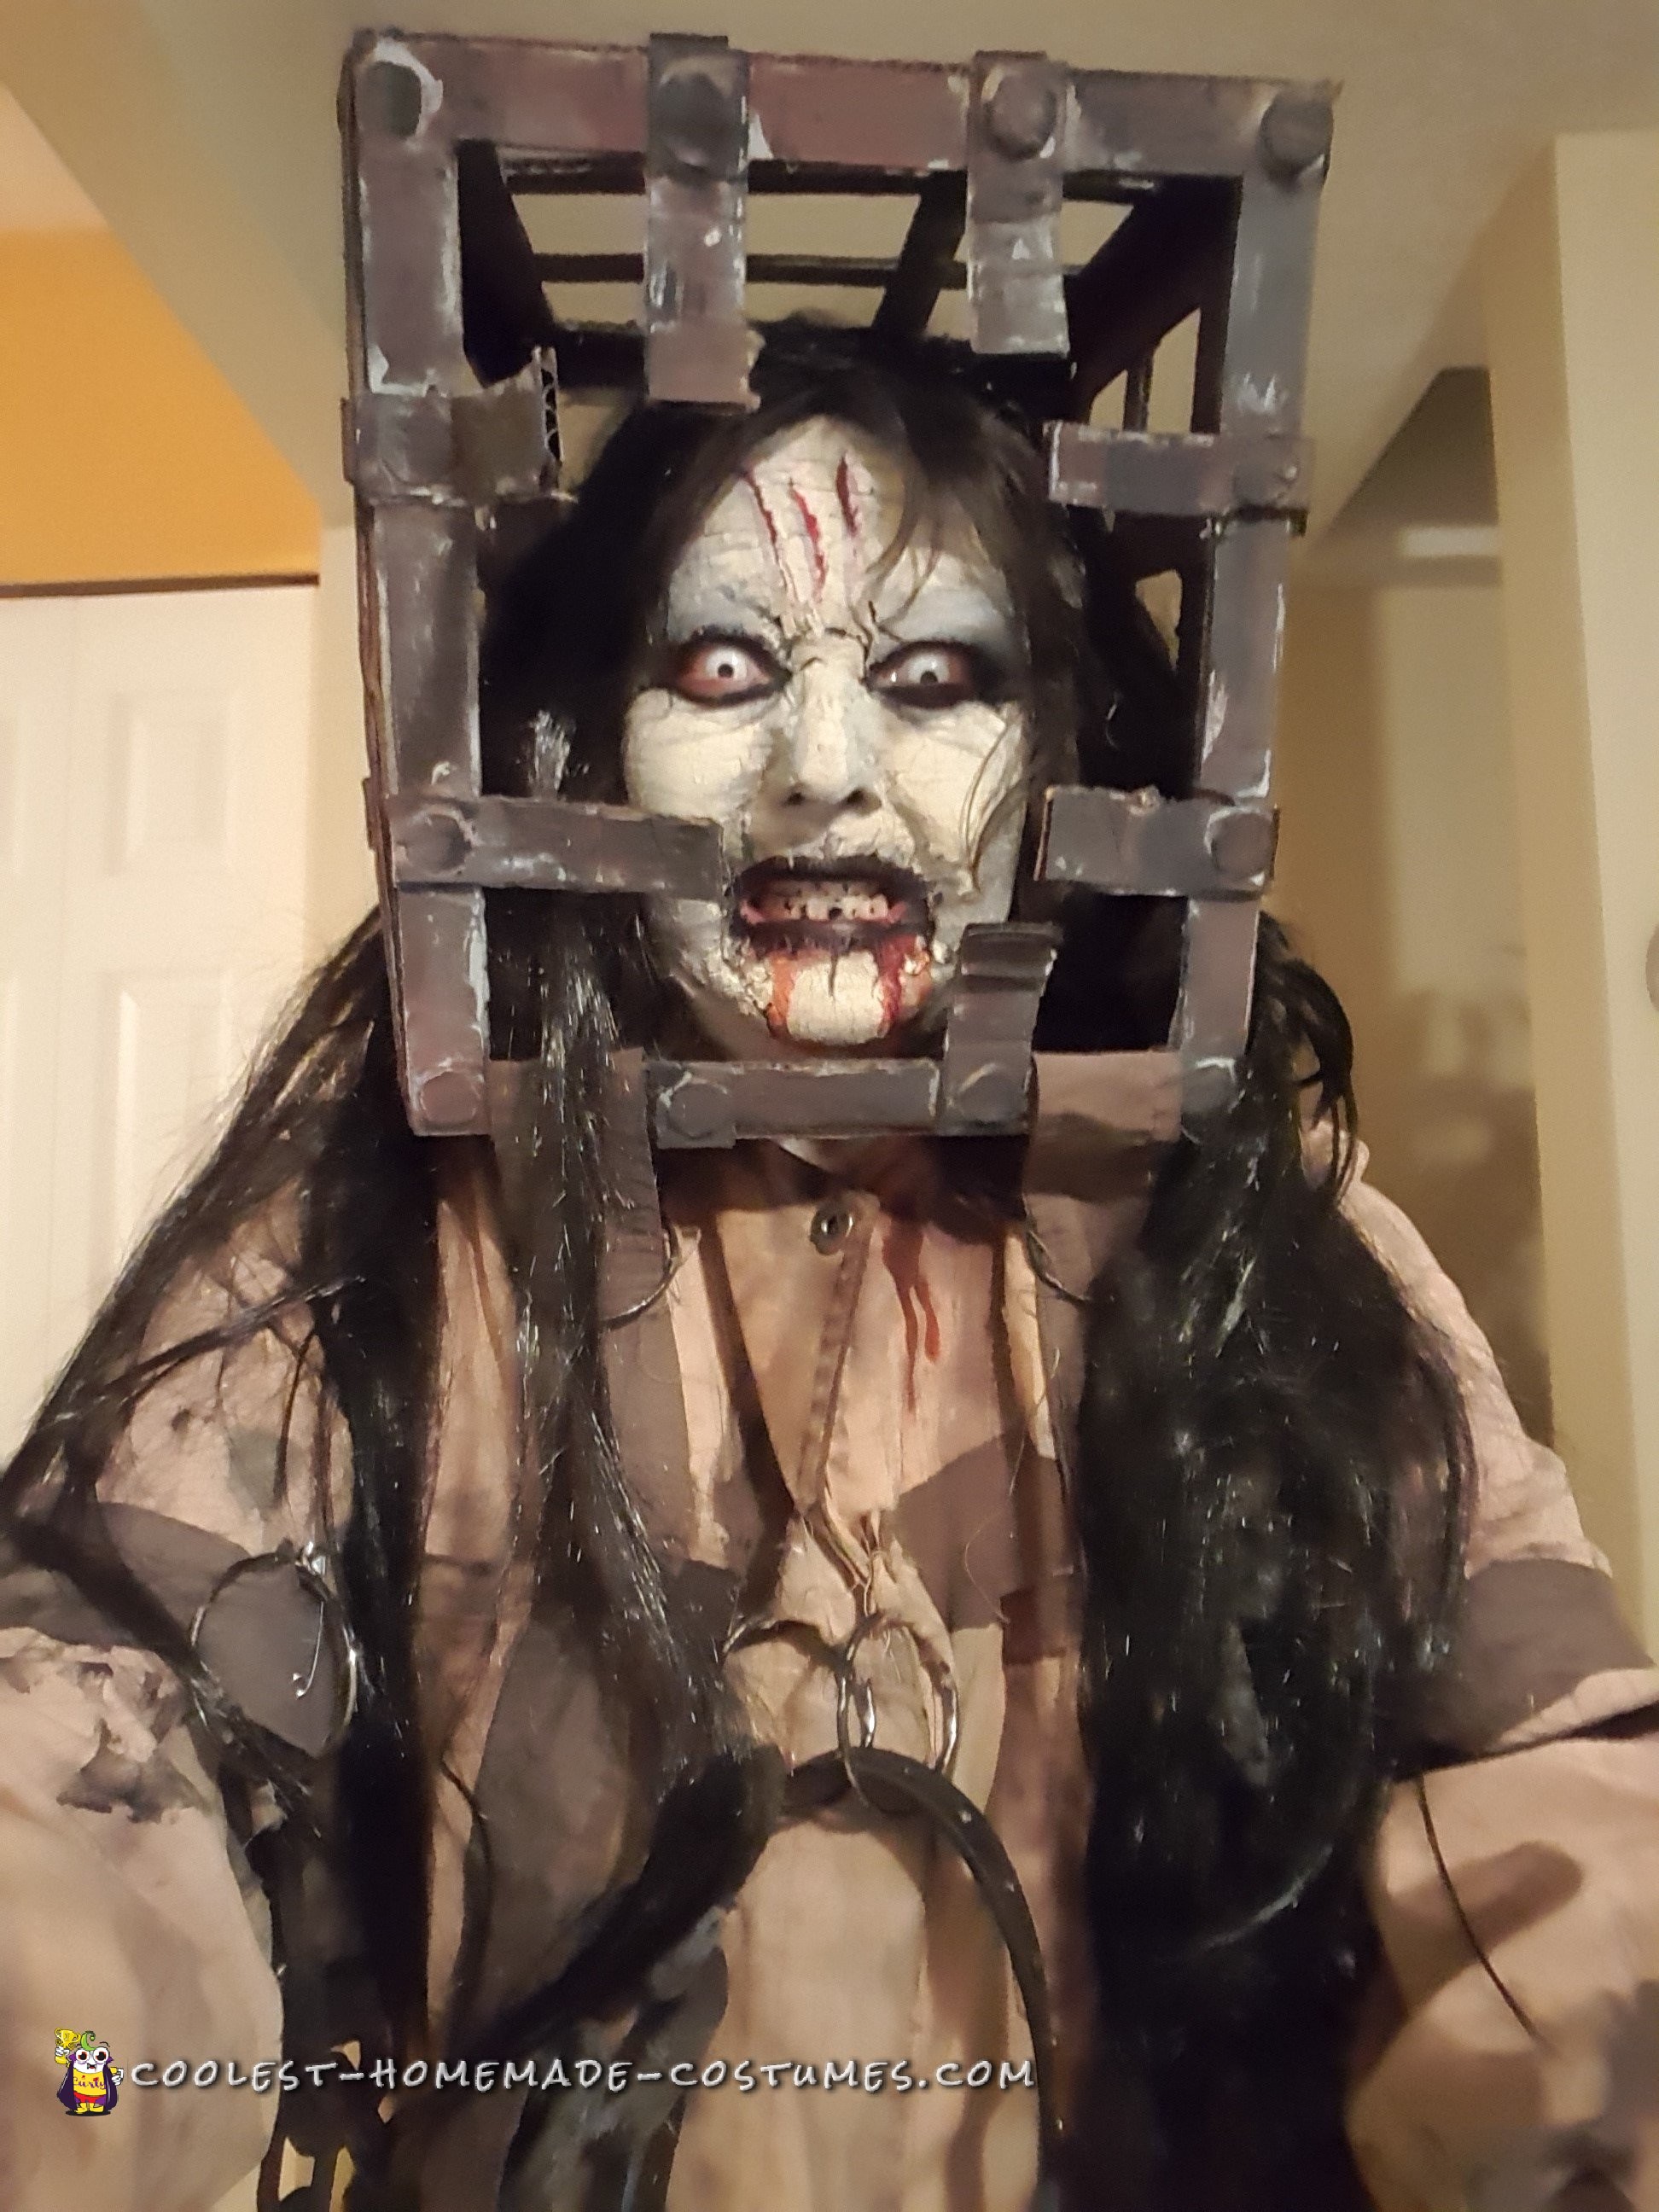 View all posts by Heather S. 13 Ghosts Jackal Costume. 